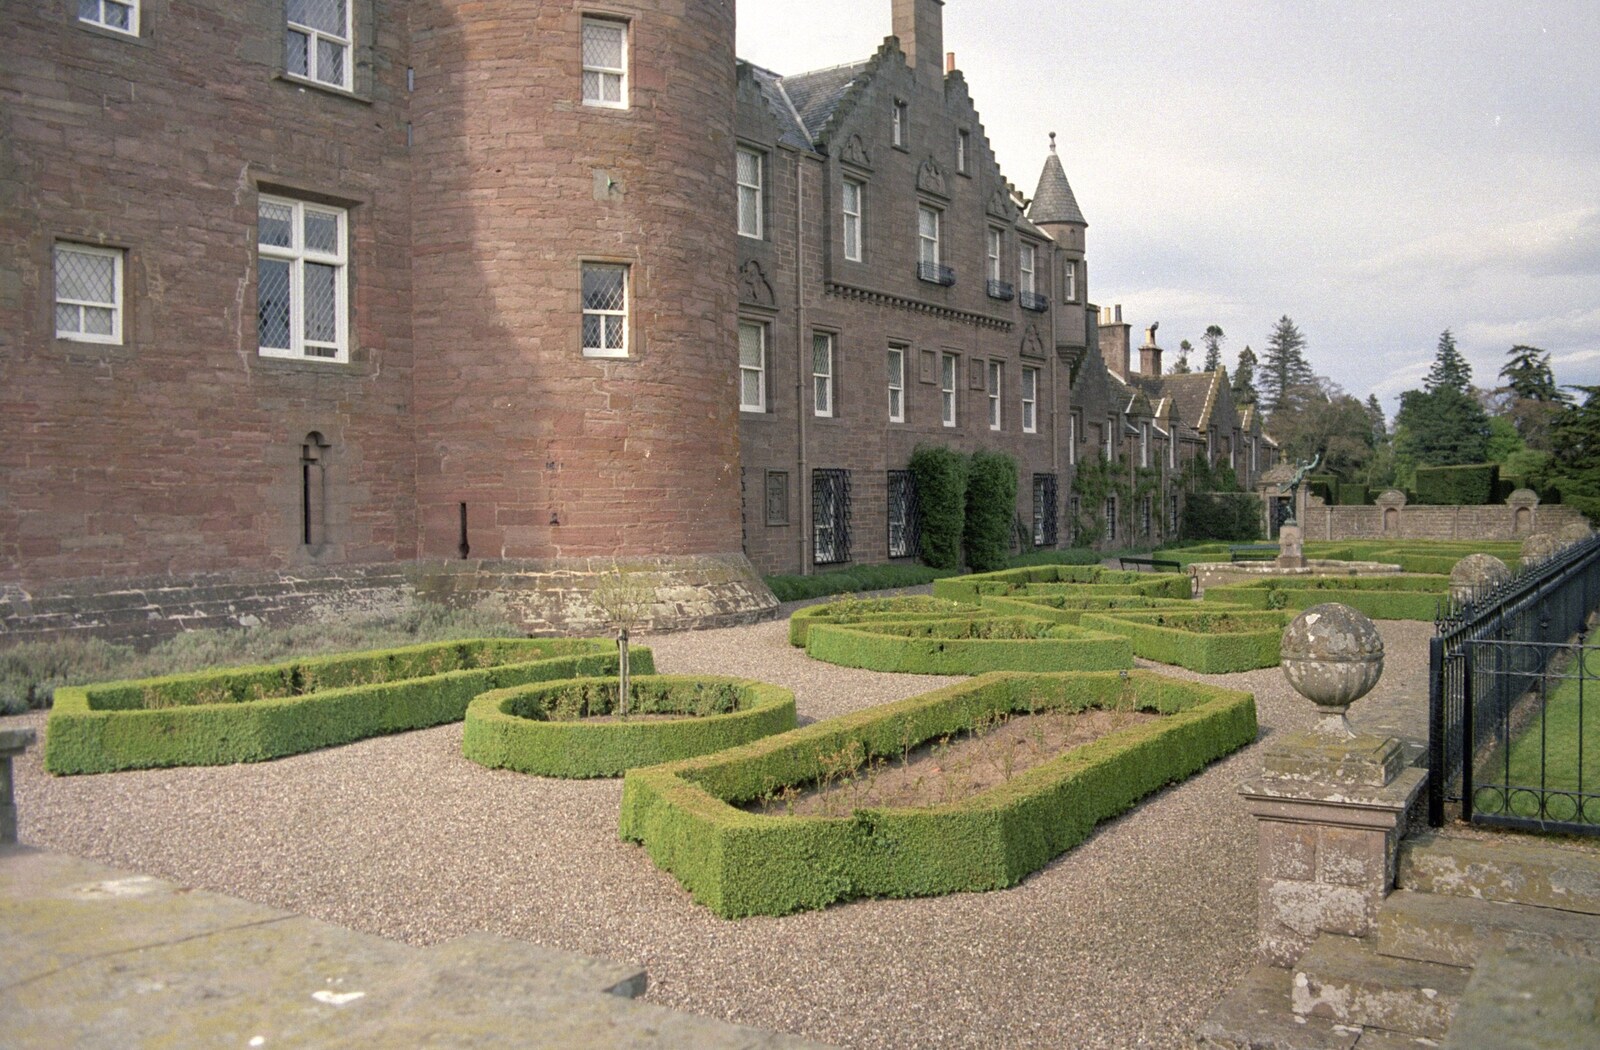 Formal gardens at Glamis Castle from A Trip to Pitlochry, Scotland - 24th March 1998